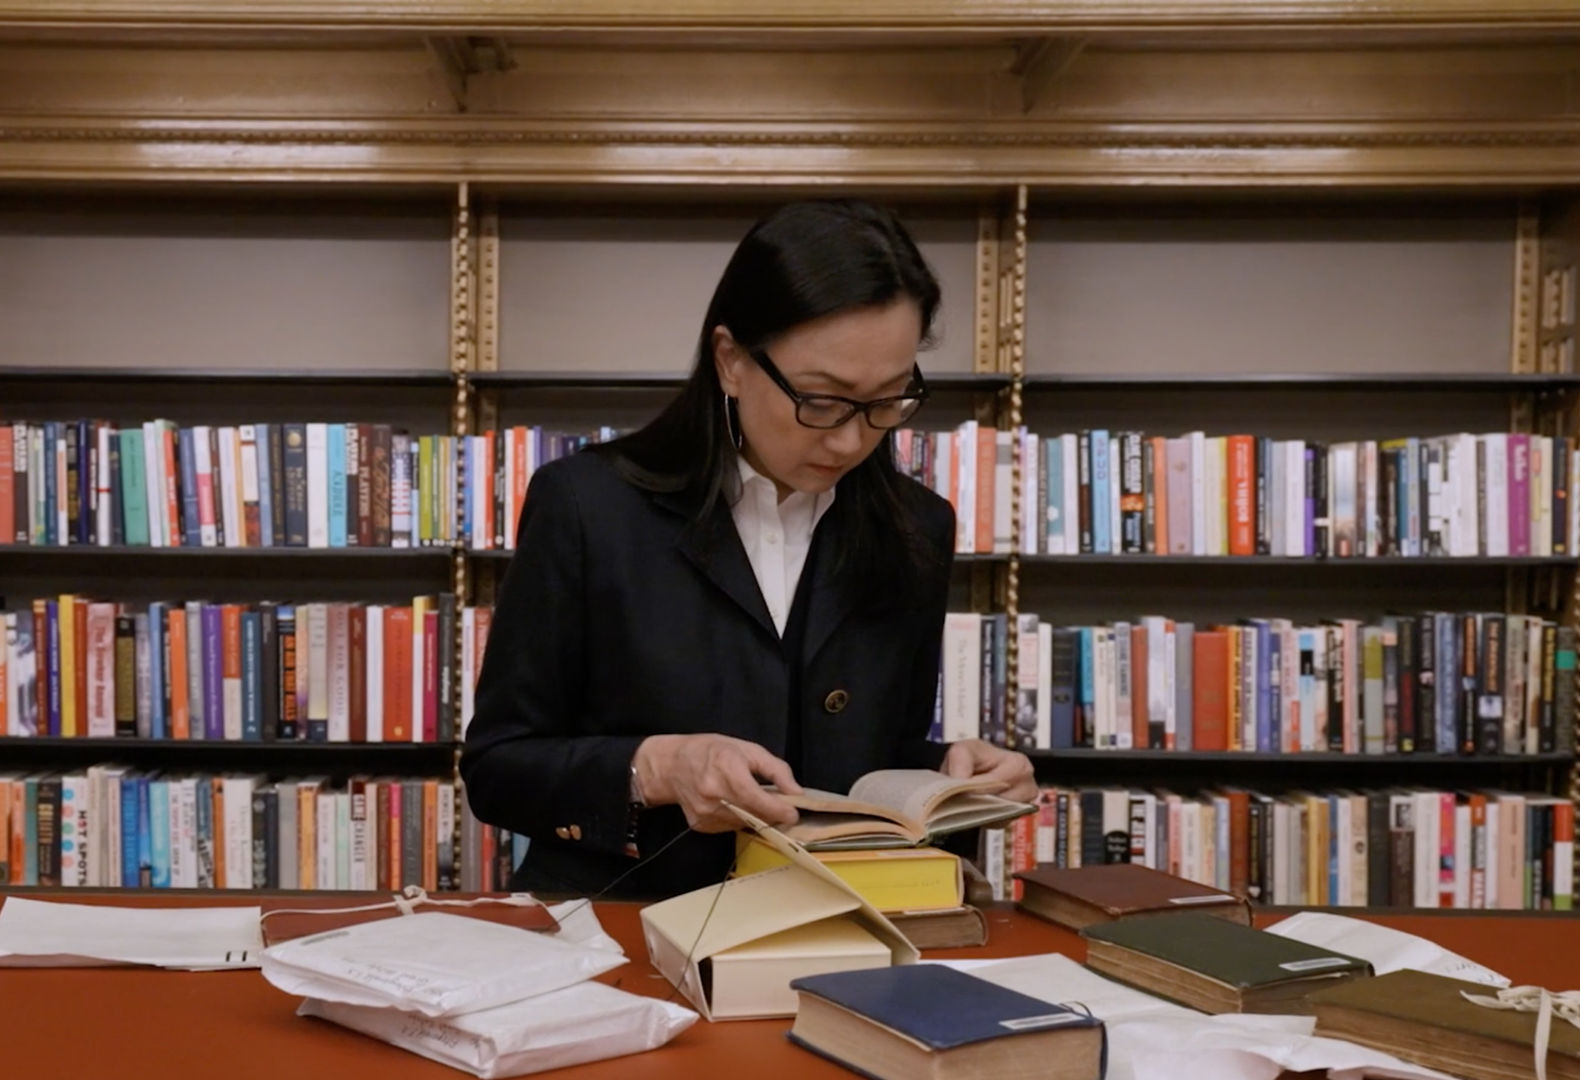 The Novelist Min Jin Lee peruses through an assortment of books atop a red-orange tabletop surface, set against a backdrop of book shelves in a New York Public Library study room.